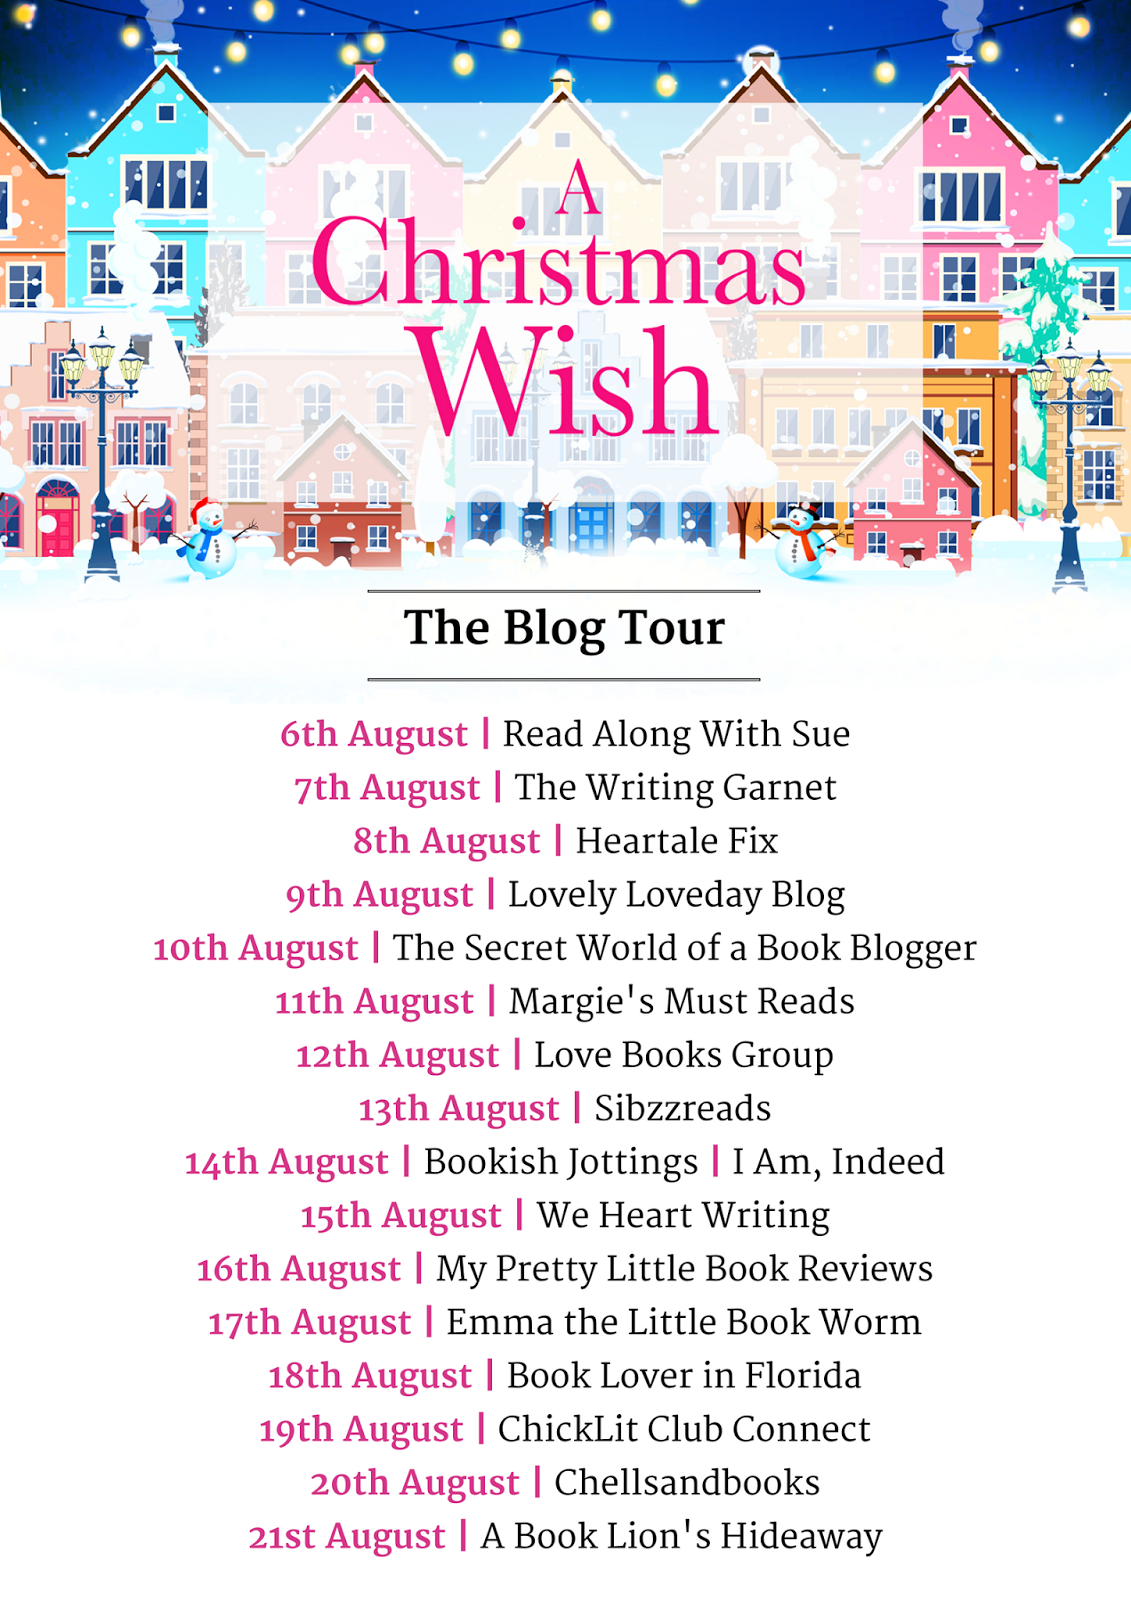 A Booklions Hideaway Book Review ~ A Christmas Wish By Erin Green 